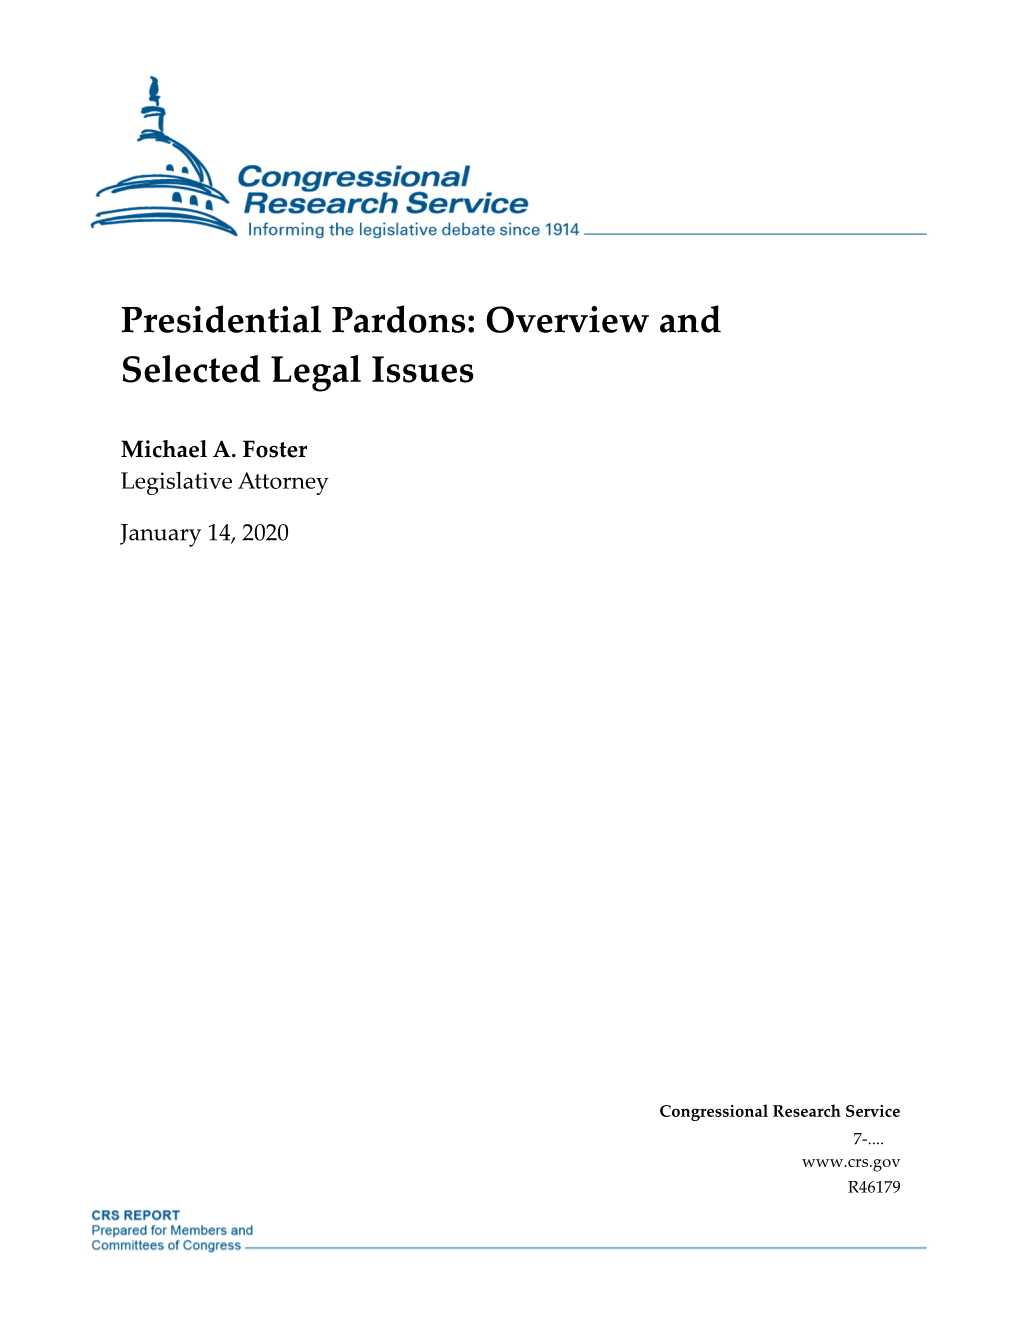 Presidential Pardons: Overview and Selected Legal Issues